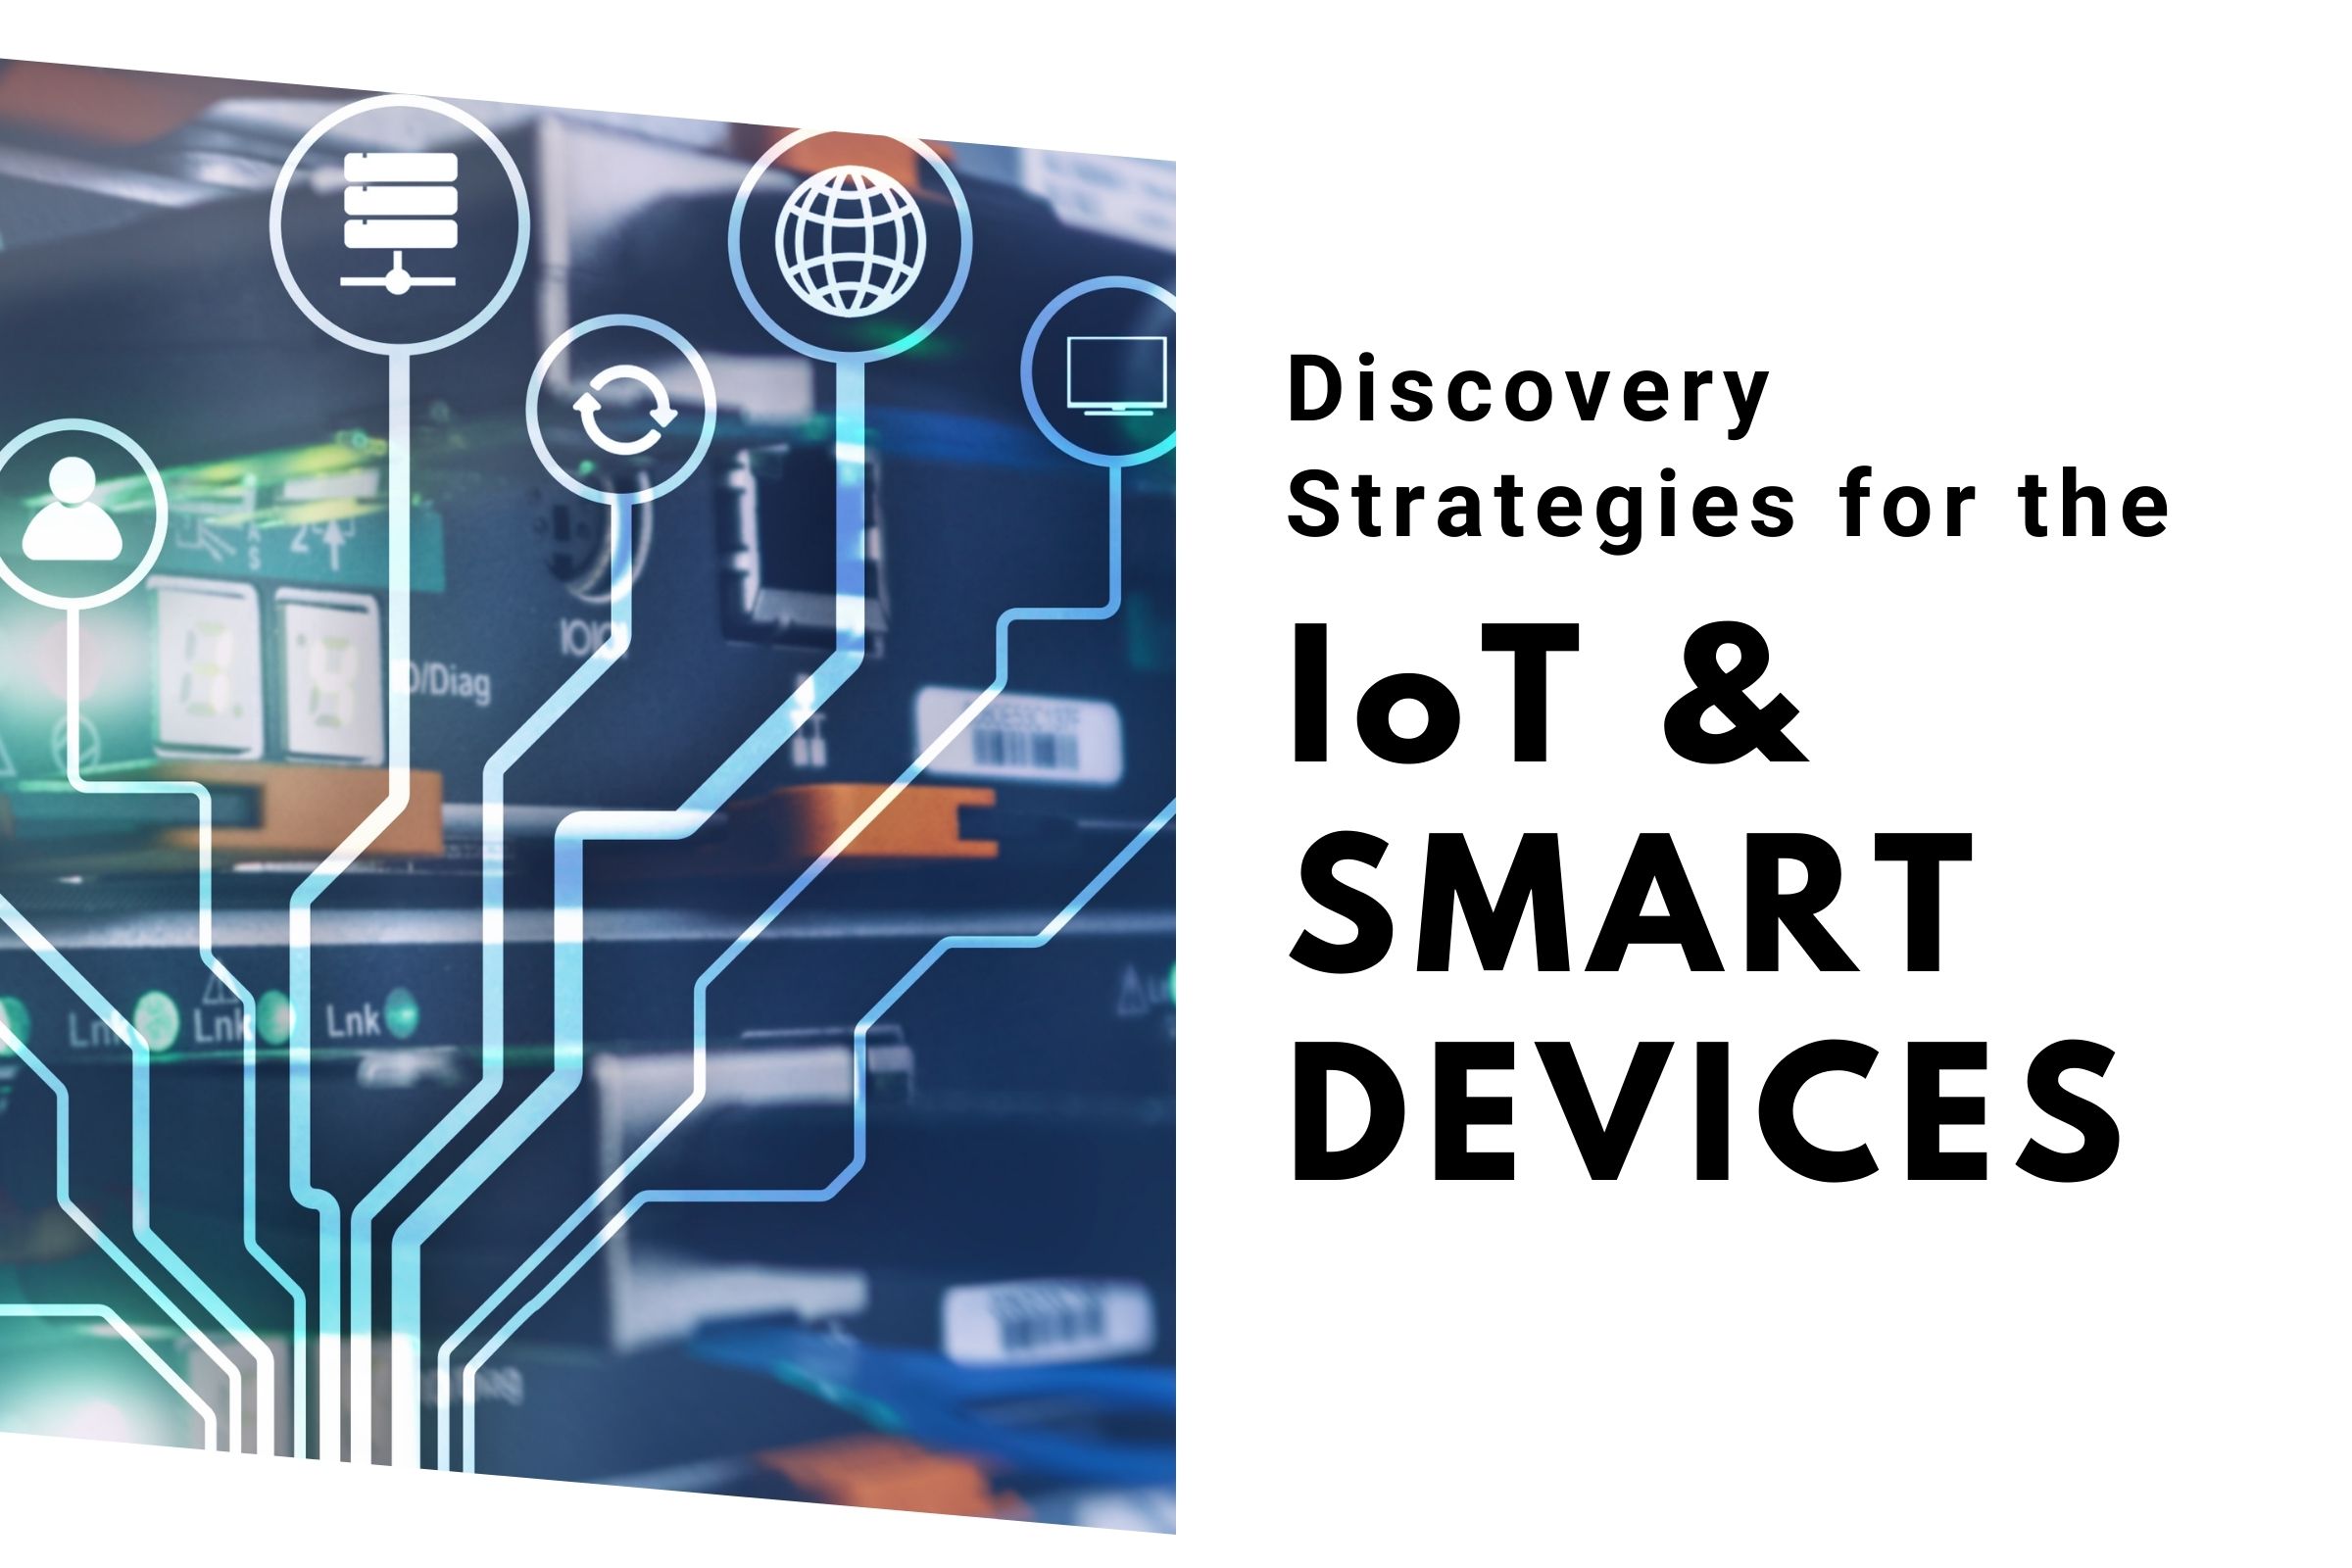 Discovery Strategies for the IoT and Smart Devices